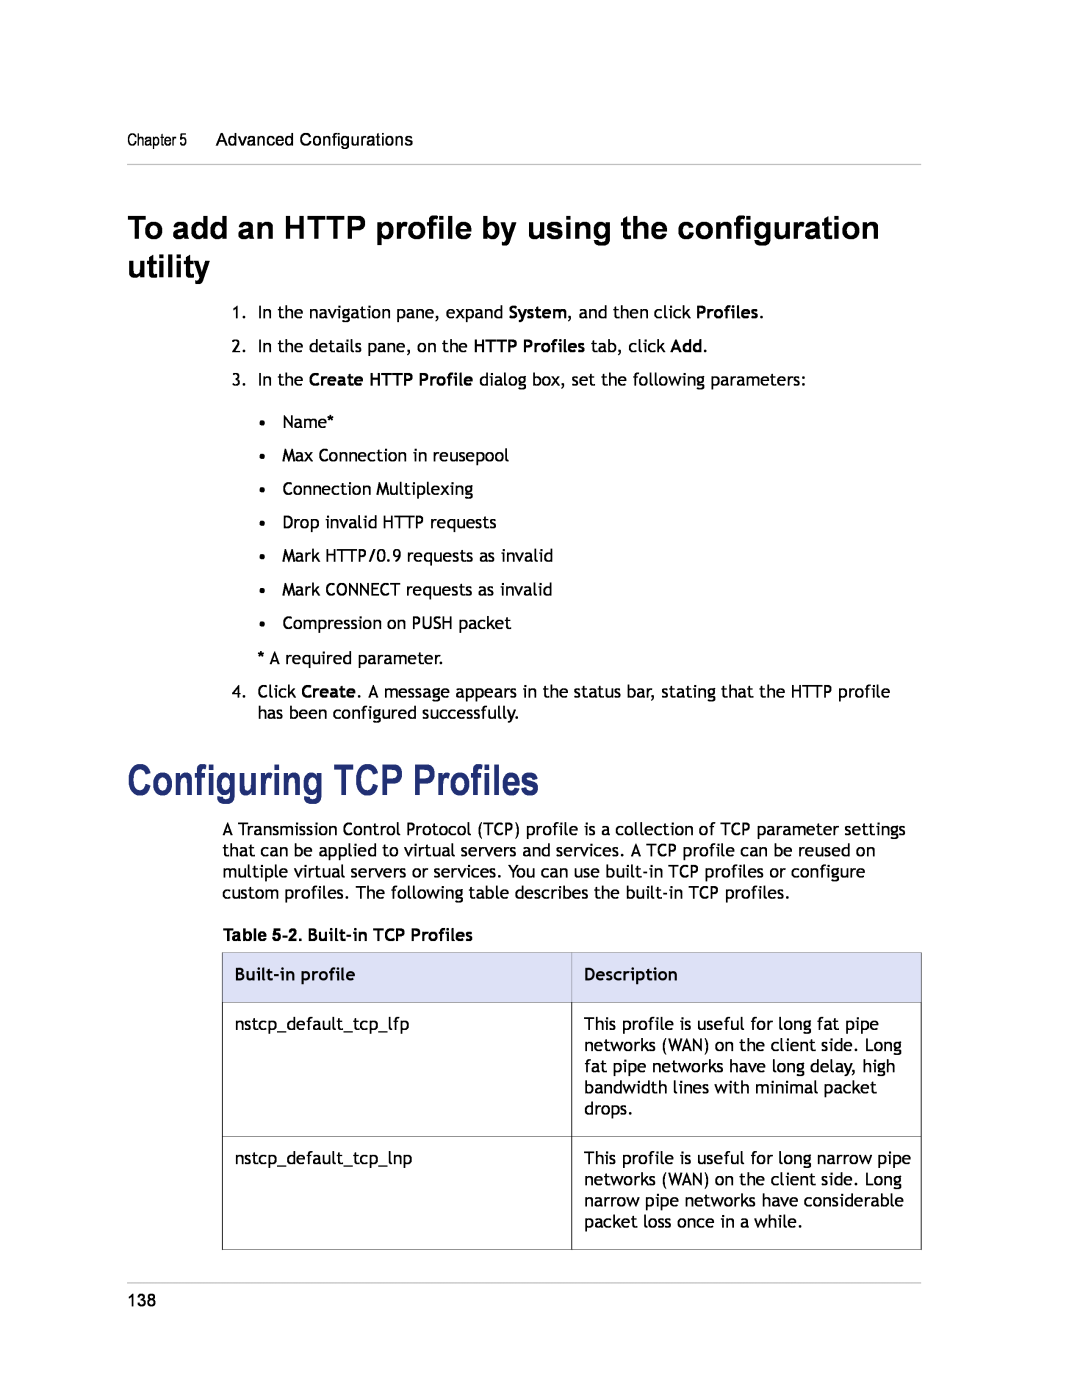 Citrix Systems CITRIX NETSCALER 9.3 Configuring TCP Profiles, To add an HTTP profile by using the configuration utility 